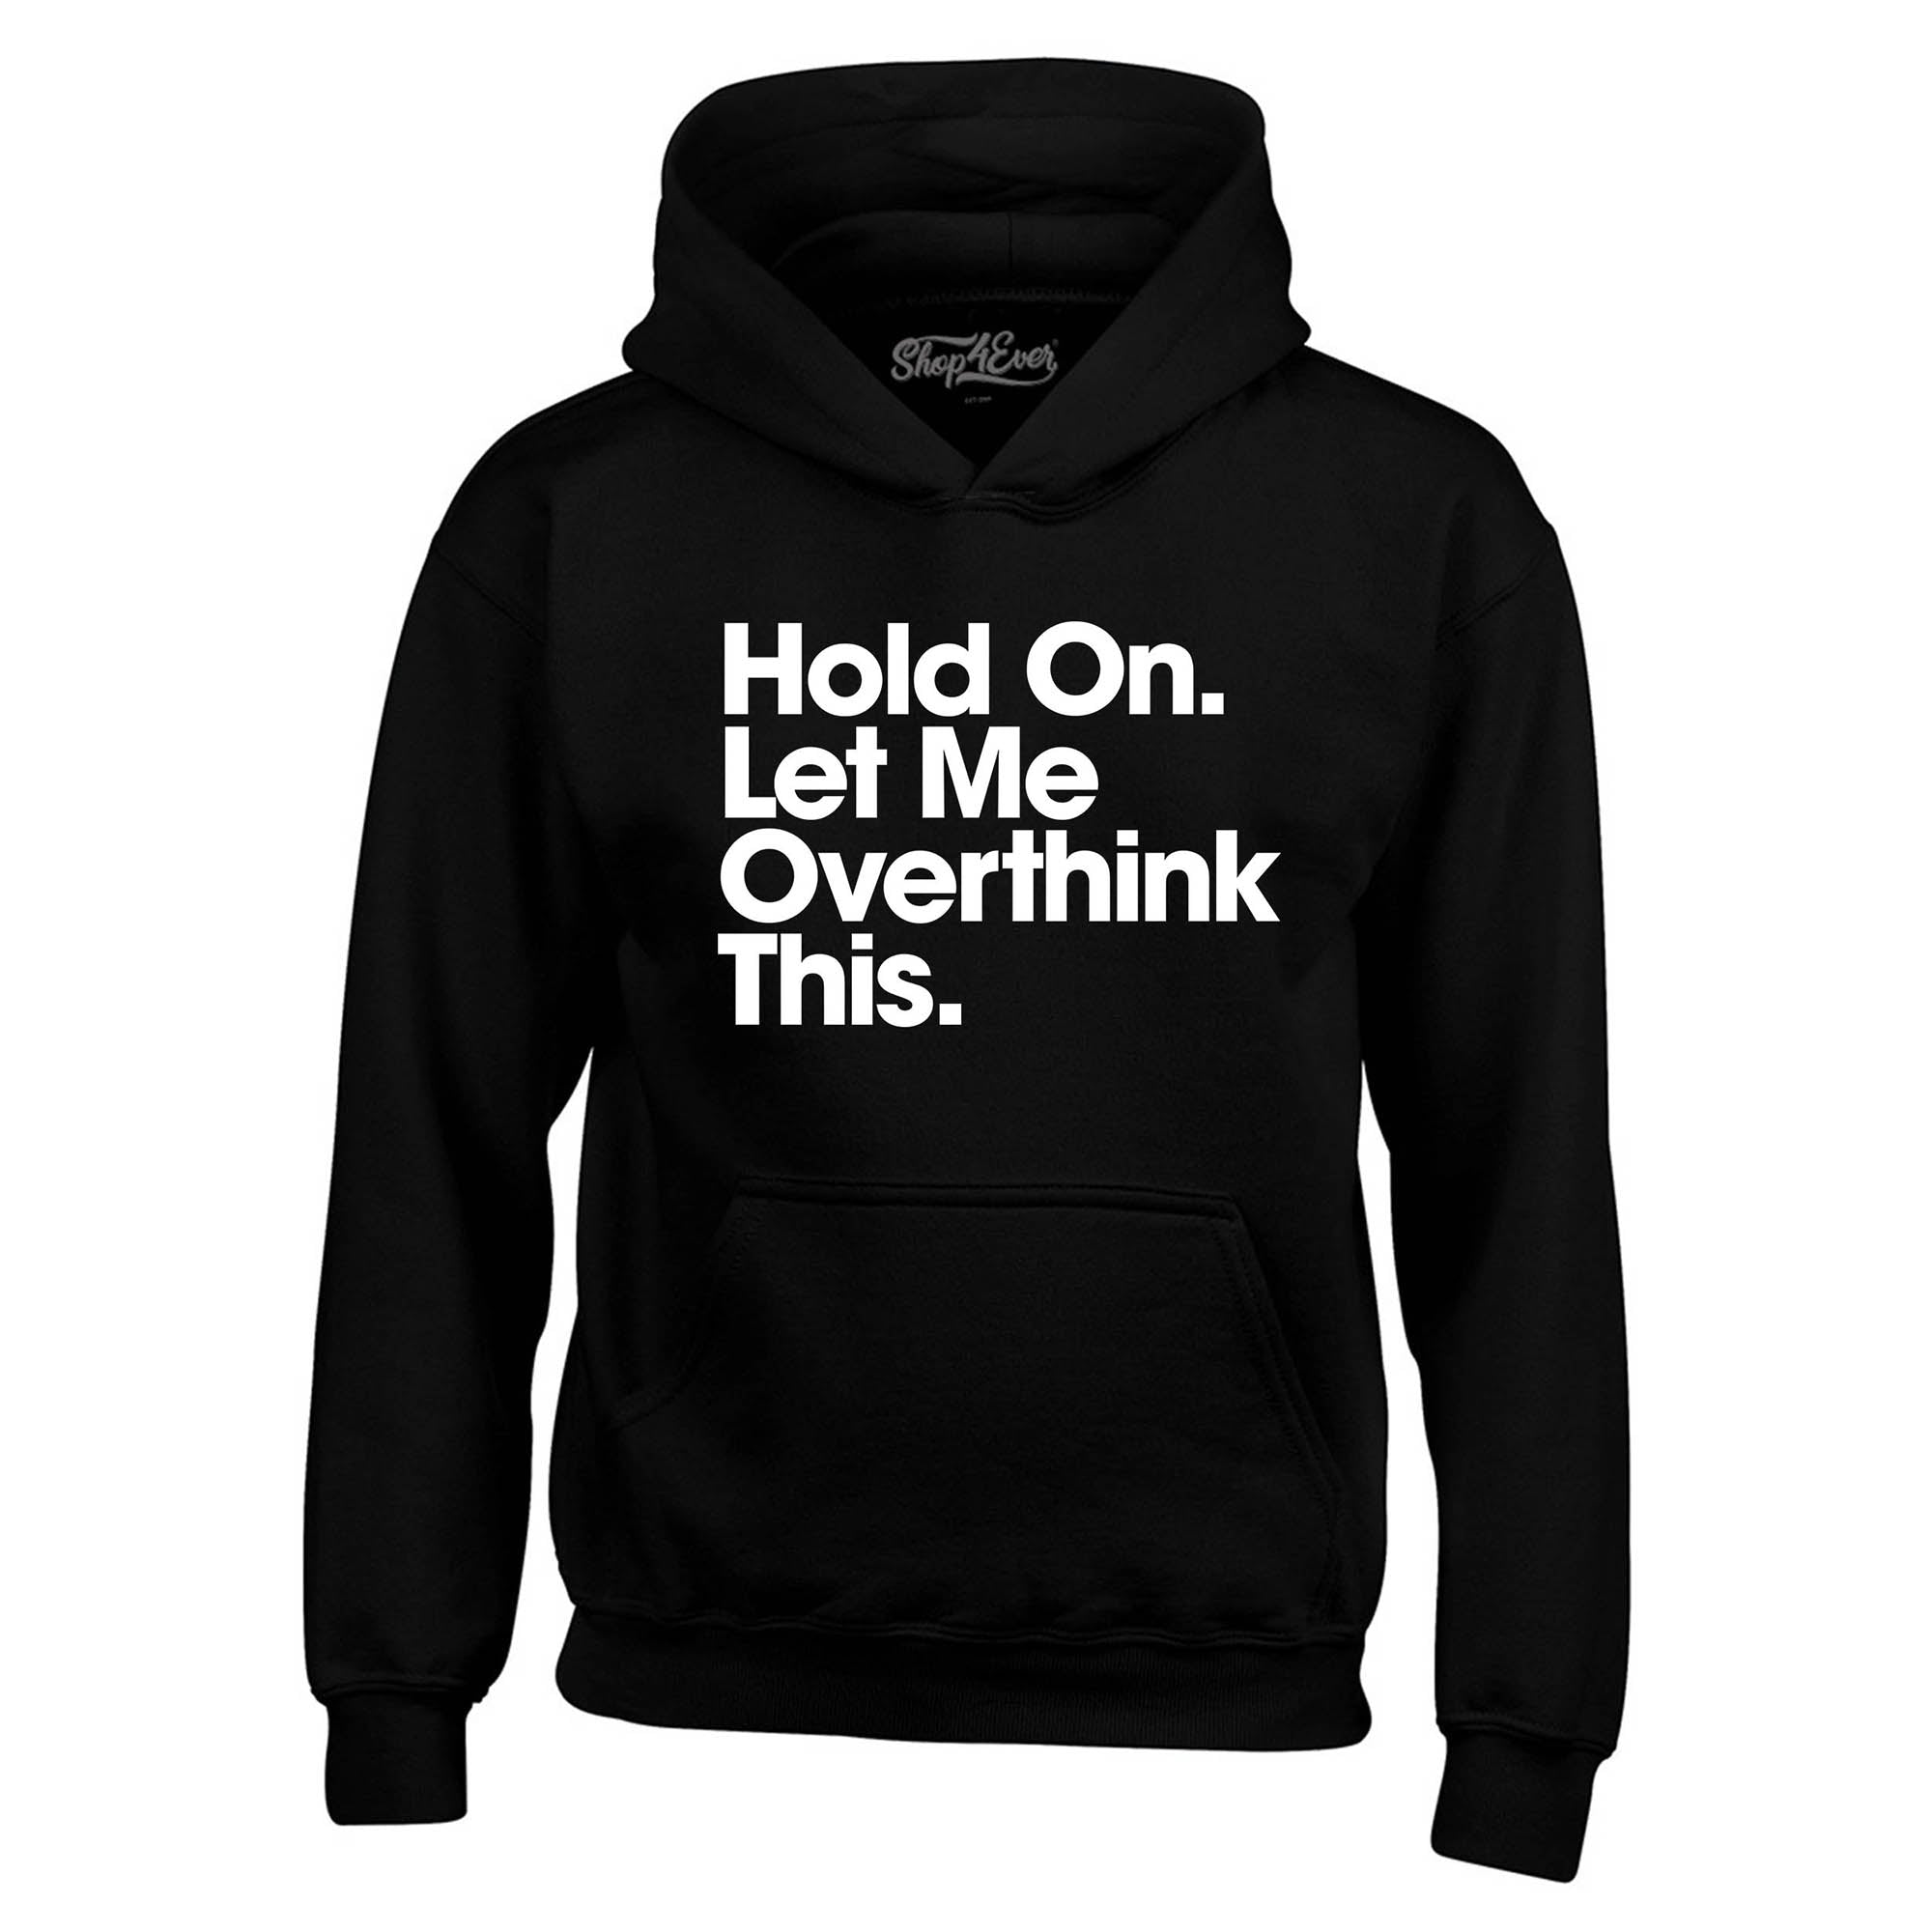 Hold On. Let Me Overthink This. Hoodie Sweatshirts